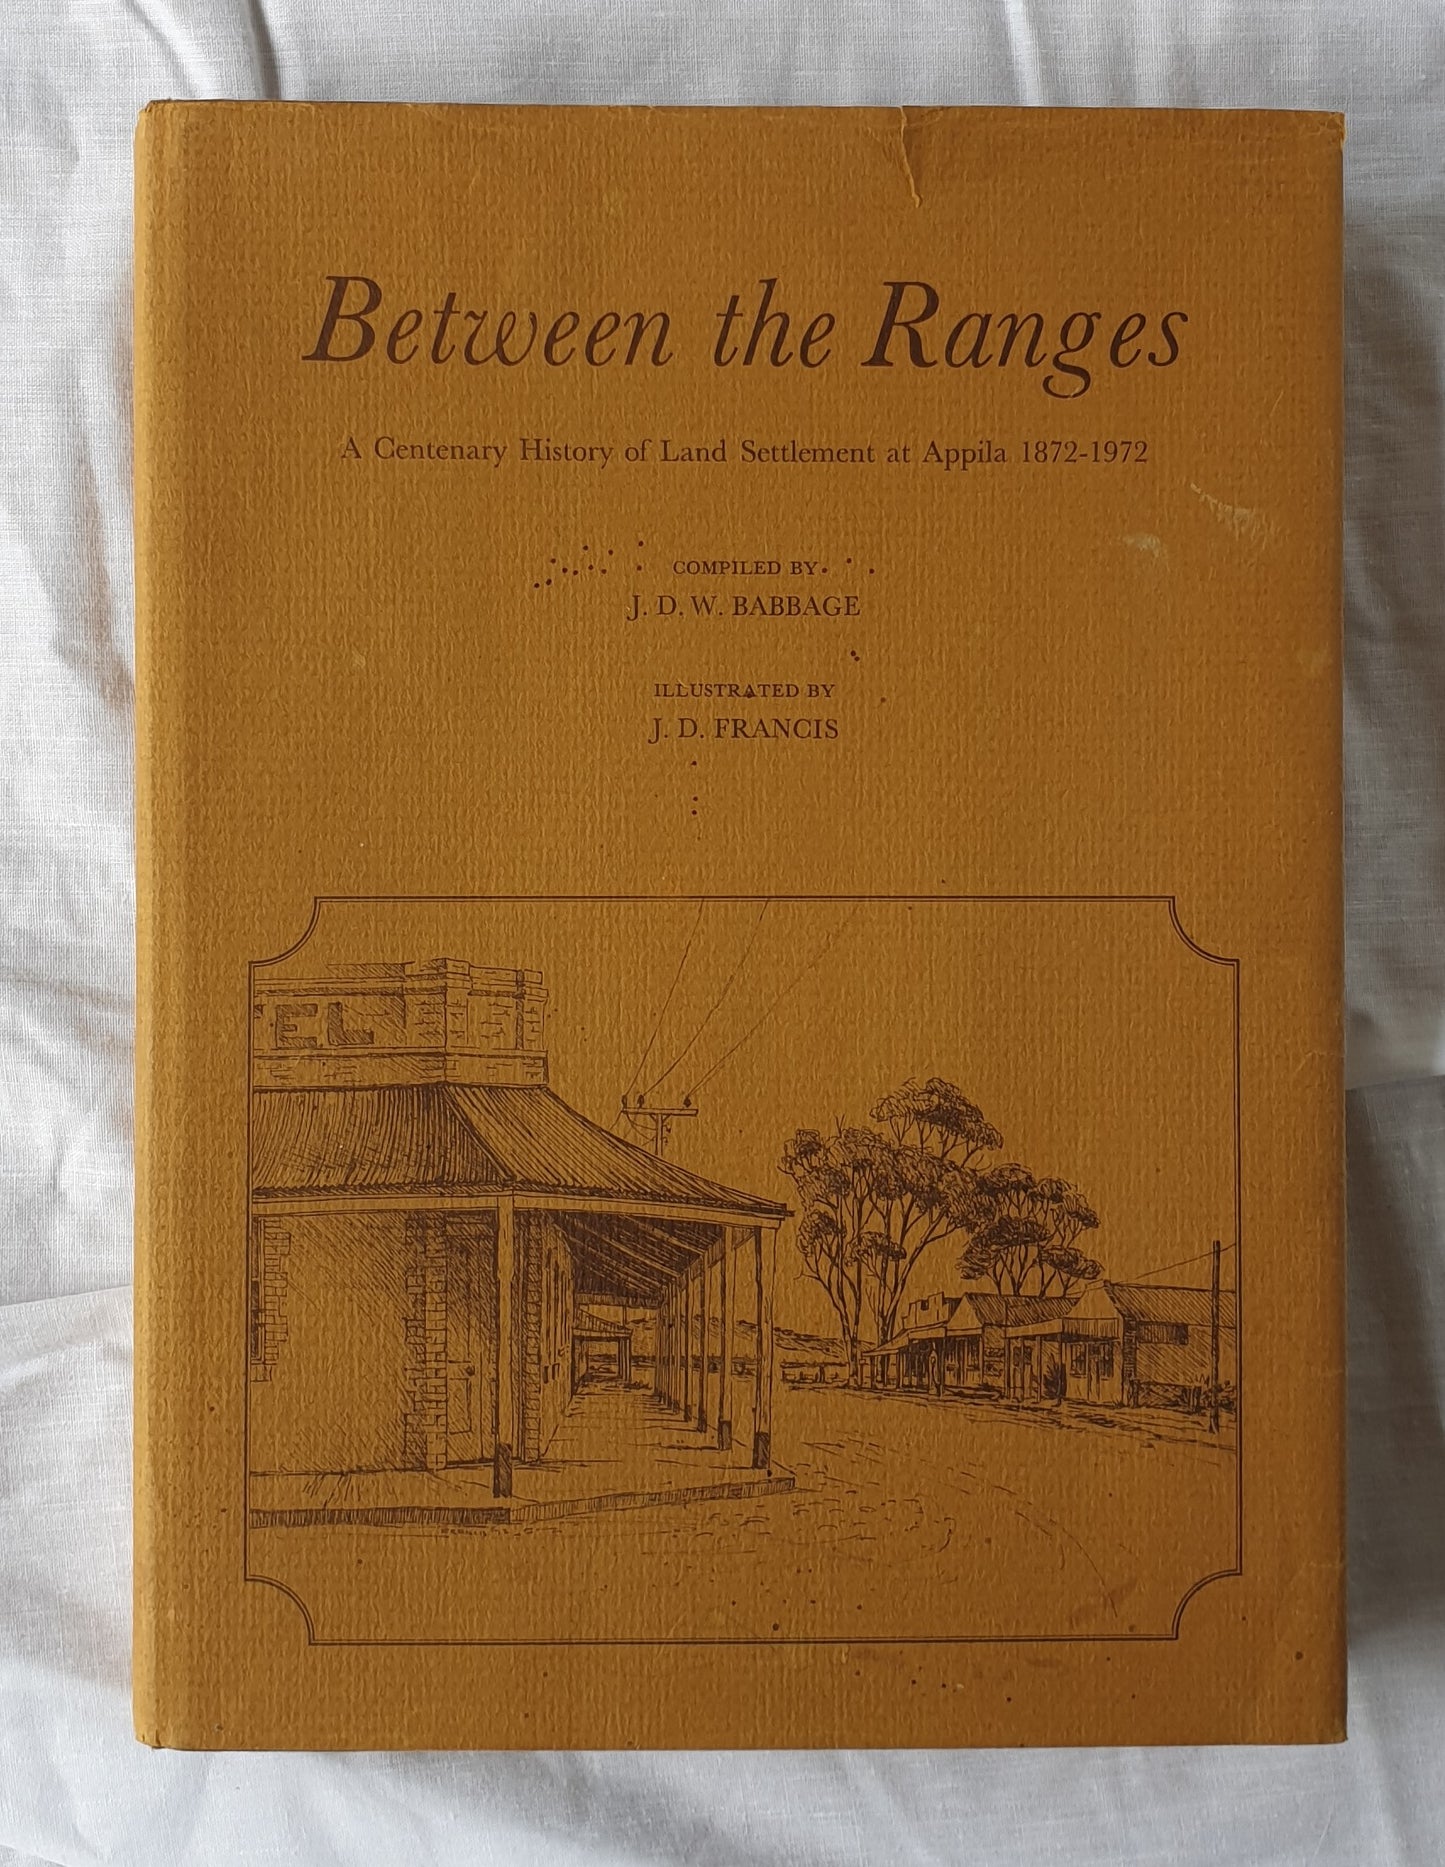 Between the Ranges  A Centenary History of Land Settlement at Appila 1872-1972  Compiled by J. D. W. Babbage  Illustrated by J. D. Francis